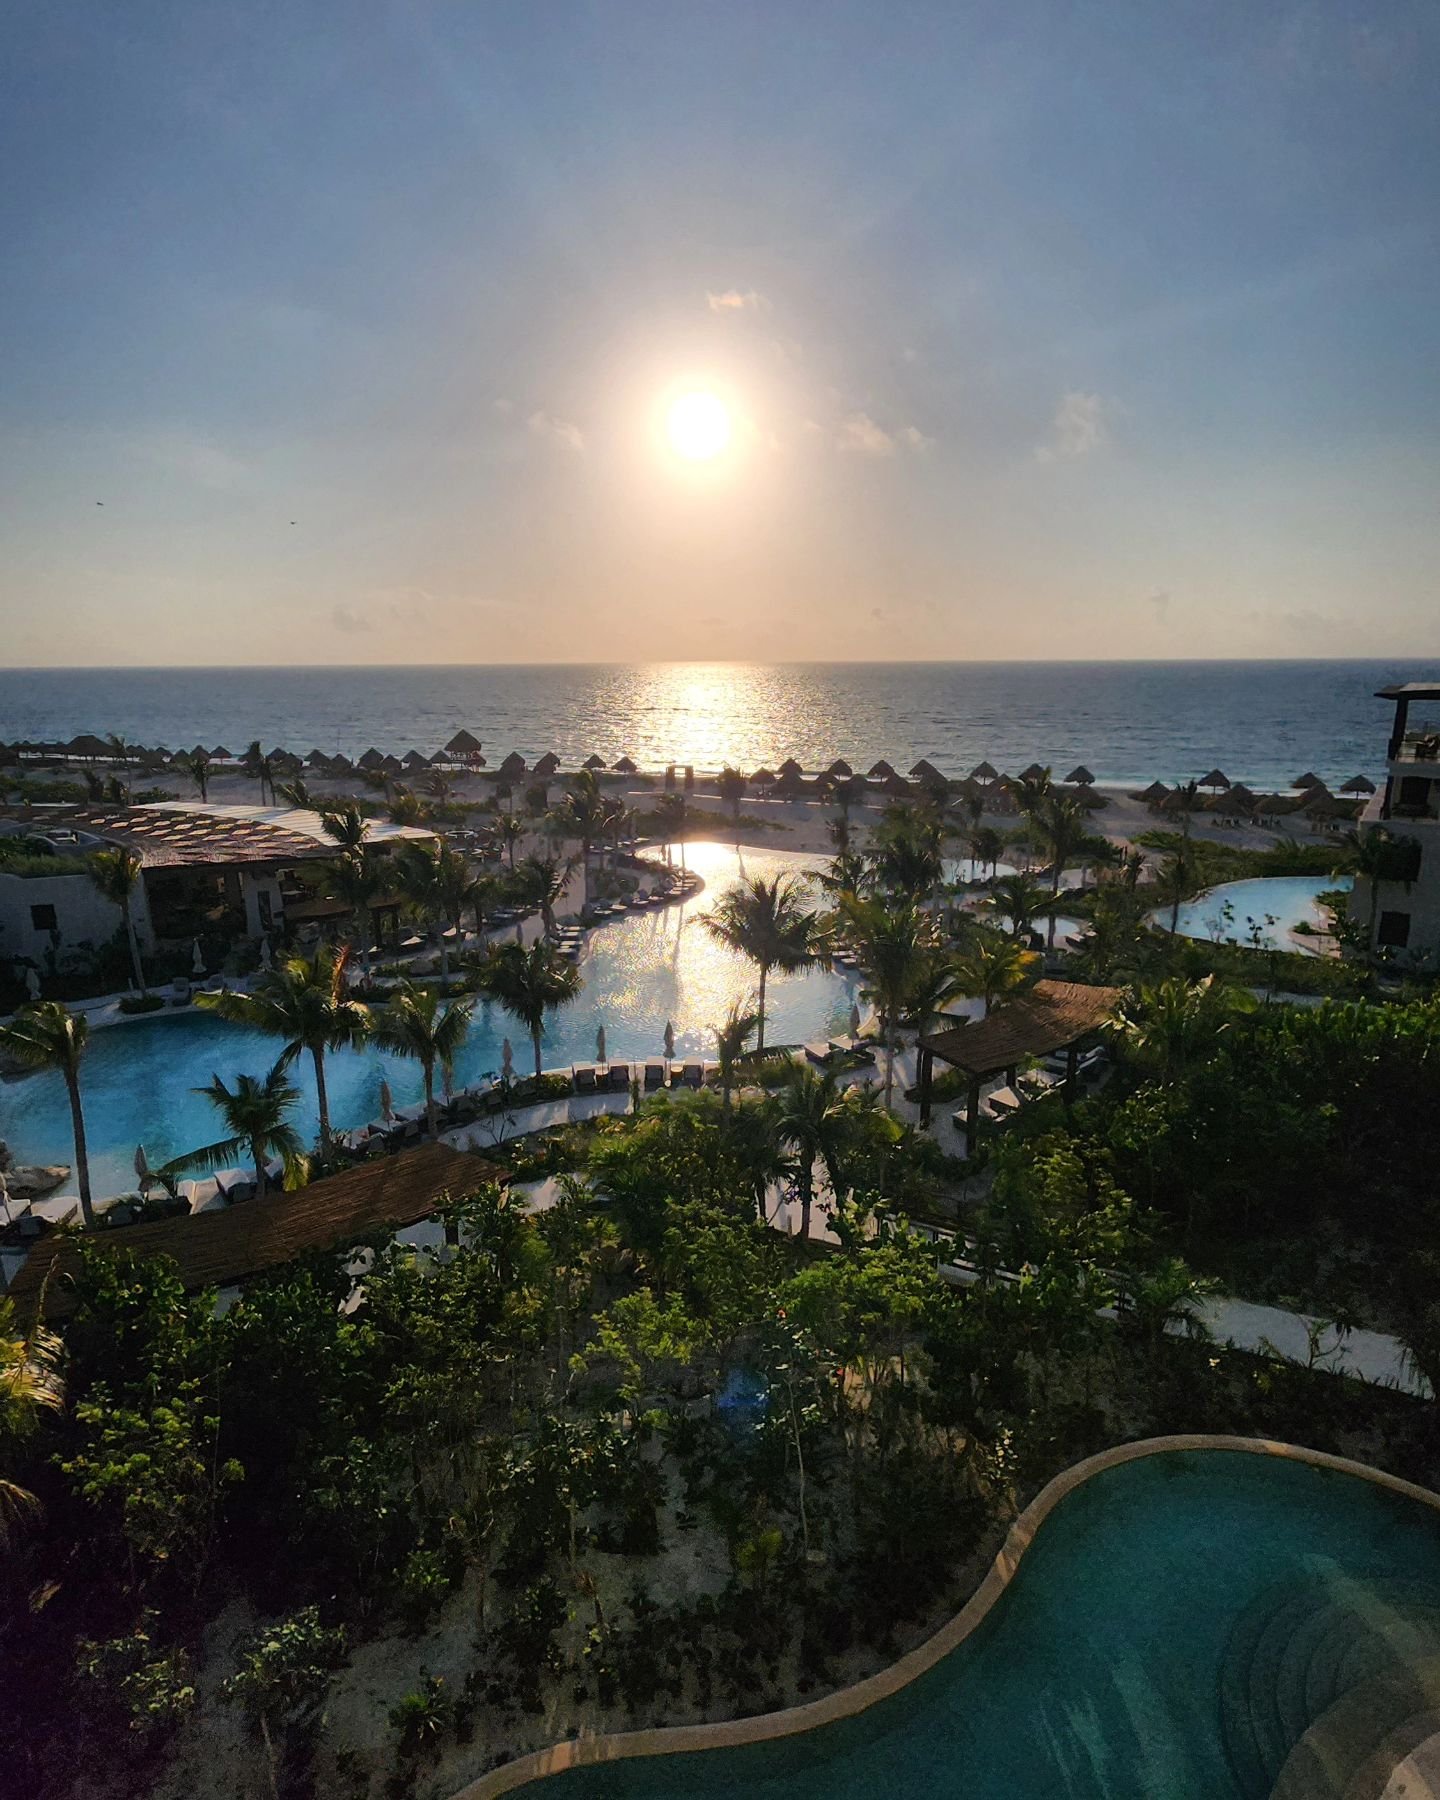 Embark on a journey of a lifetime with breathtaking sunrises at the new Secrets Playa Blanca Resort and Spa, exclusively for adults, all-inclusive, and perfectly planned by Majestic Dream Vacations for your destination wedding, honeymoon, or romantic